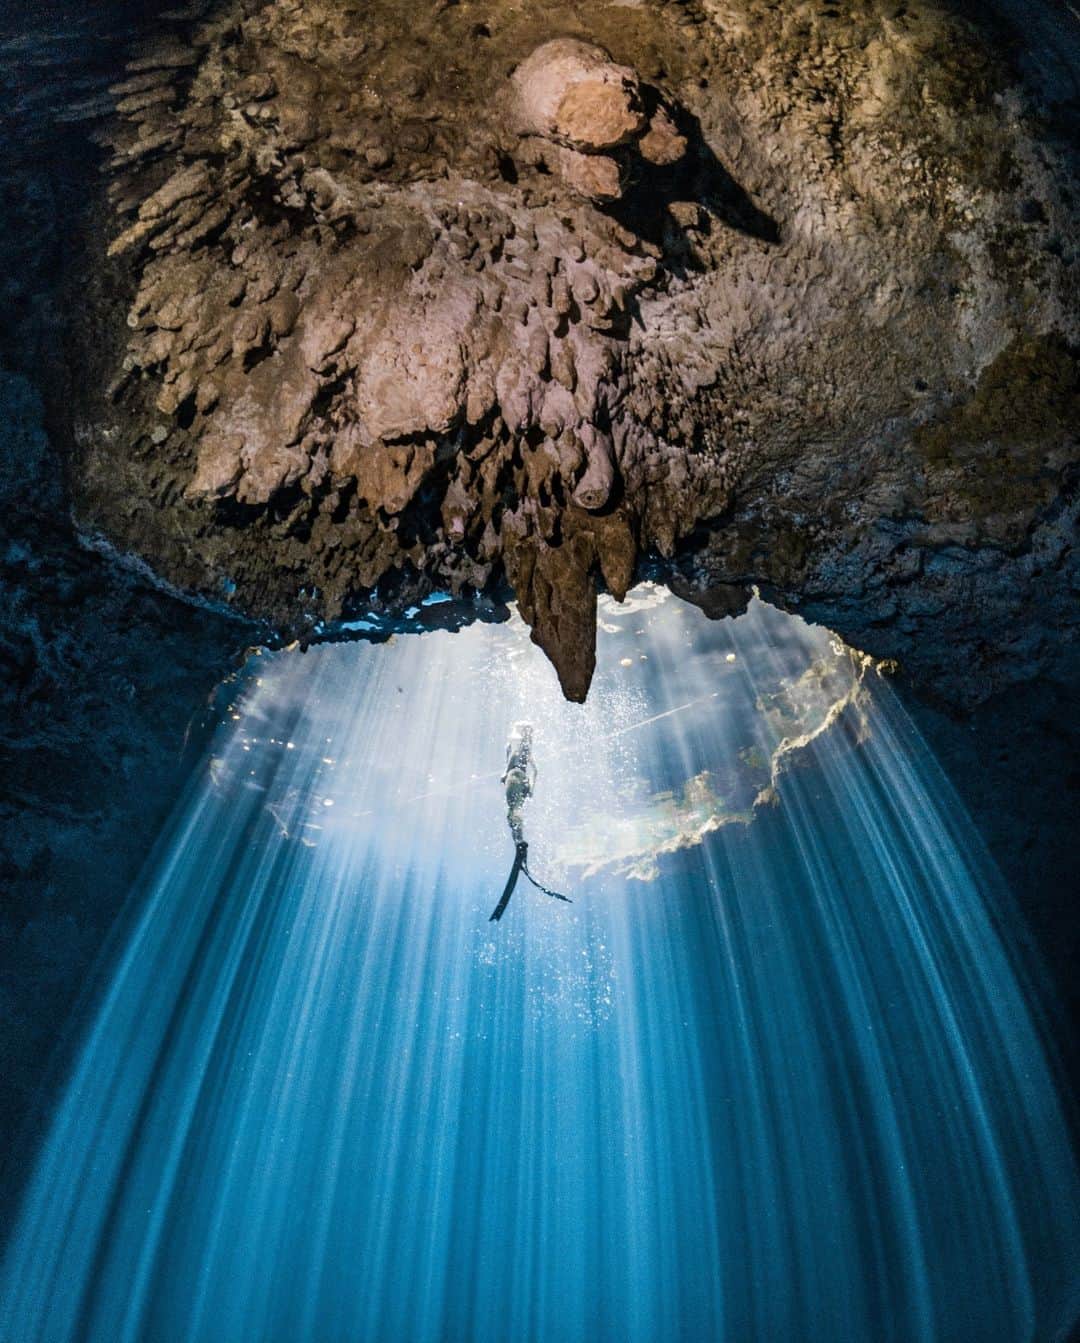 goproのインスタグラム：「Photo of the Day: Immersed in the elements 🤿 GoPro Subscriber @pepiaux earned $500 for submitting this cenote snap of @loraine_swann to GoPro.com/Awards.  #FunFact: Mexico's Yucatán Peninsula is riddled with limestone cave systems called "cenotes". These interconnected sinkholes are filled with some of the clearest water in the world + can contain over 200 miles of underwater caves.  @gopromx #GoProMX #GoPro #Diving #FreeDiving #Mexico #Cenote #UnderwaterPhotography」